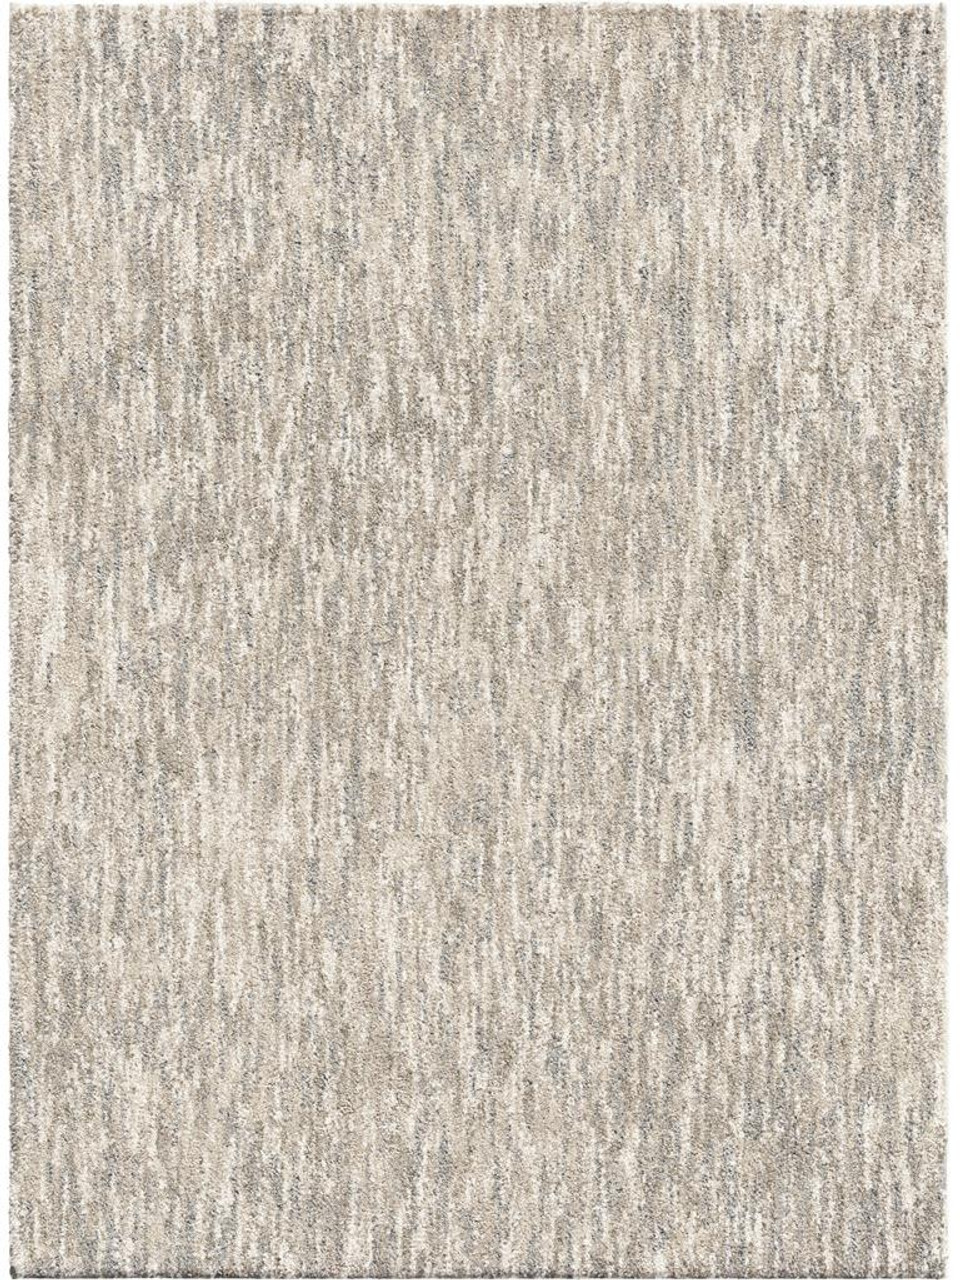 Palmetto Living Next Generation 4431 Multi Solid Taupe Grey Area Rug